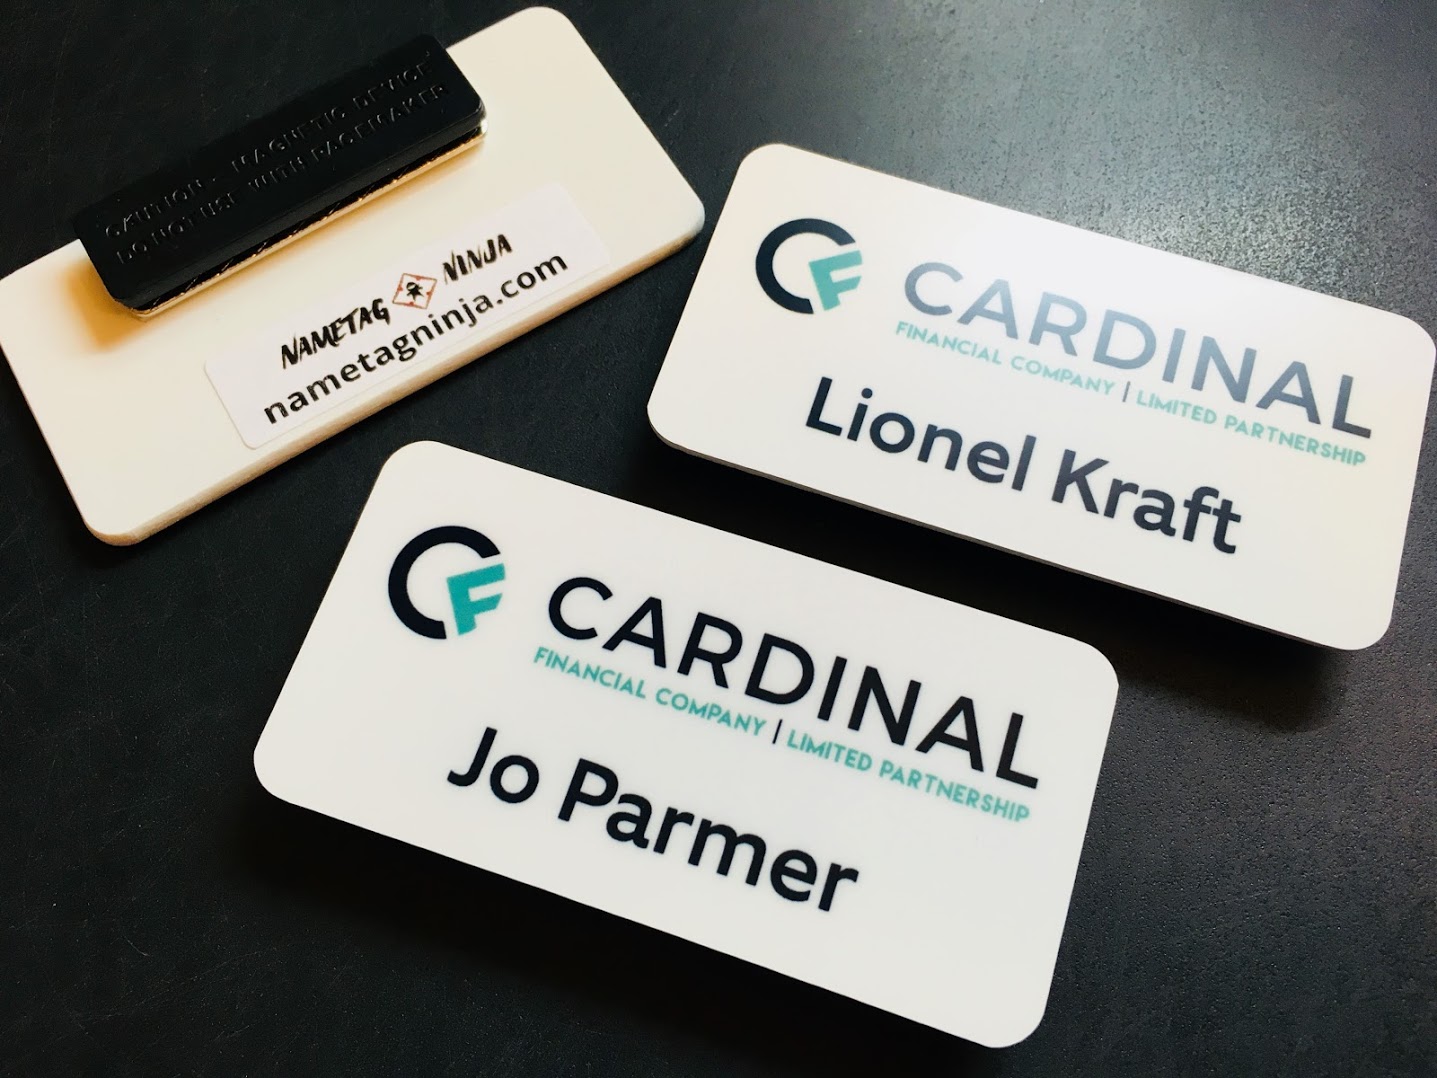 A collection of white plastic nametags, photo showing front and back of the product. Logo is for Cardinal Financial Company.